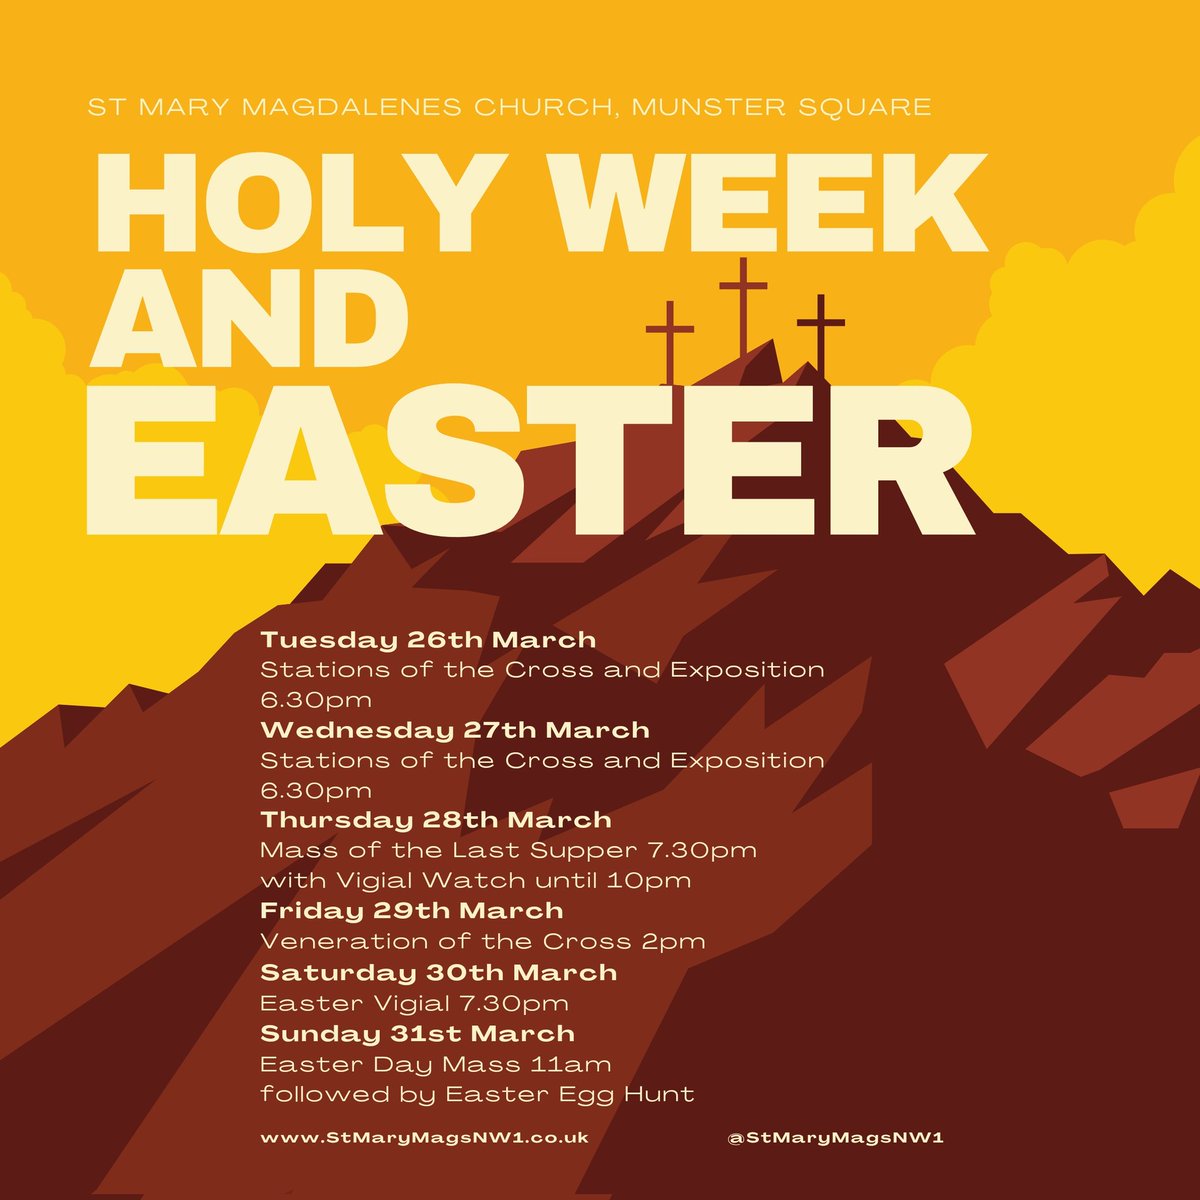 Next week is Holy Week, come join the journey to the cross and ressurection.